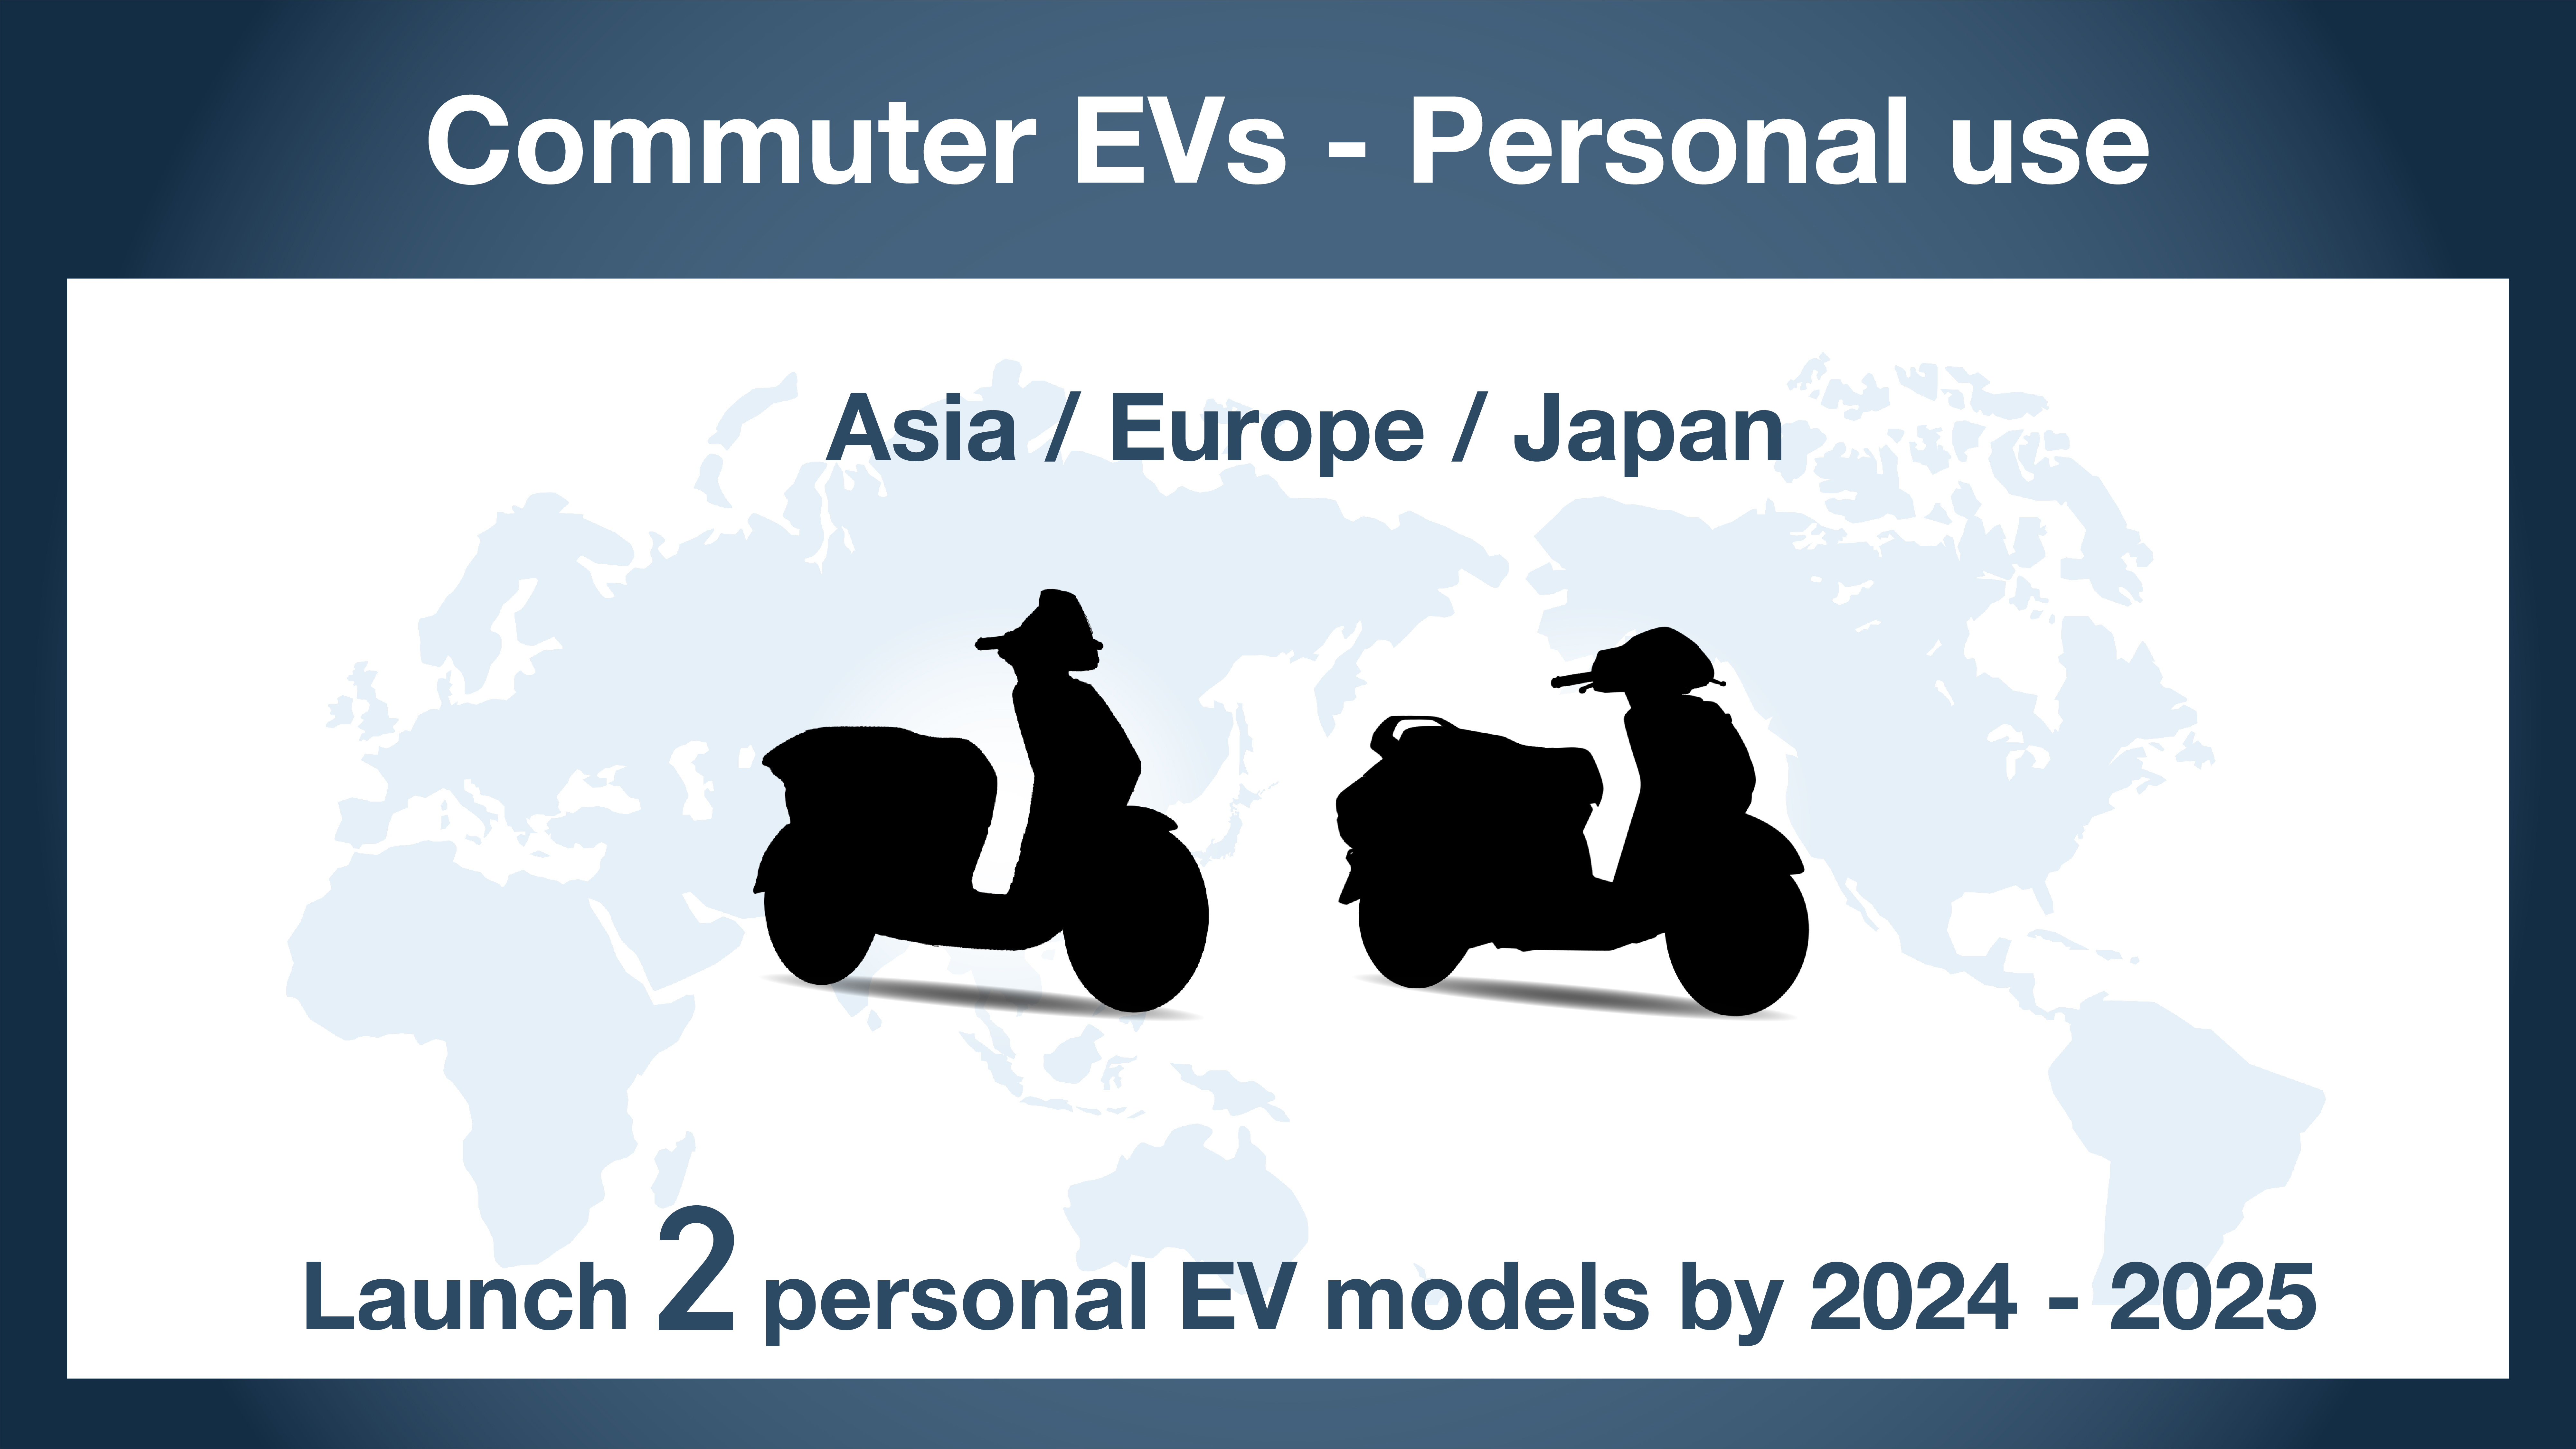 Commuter EVs - Personal use